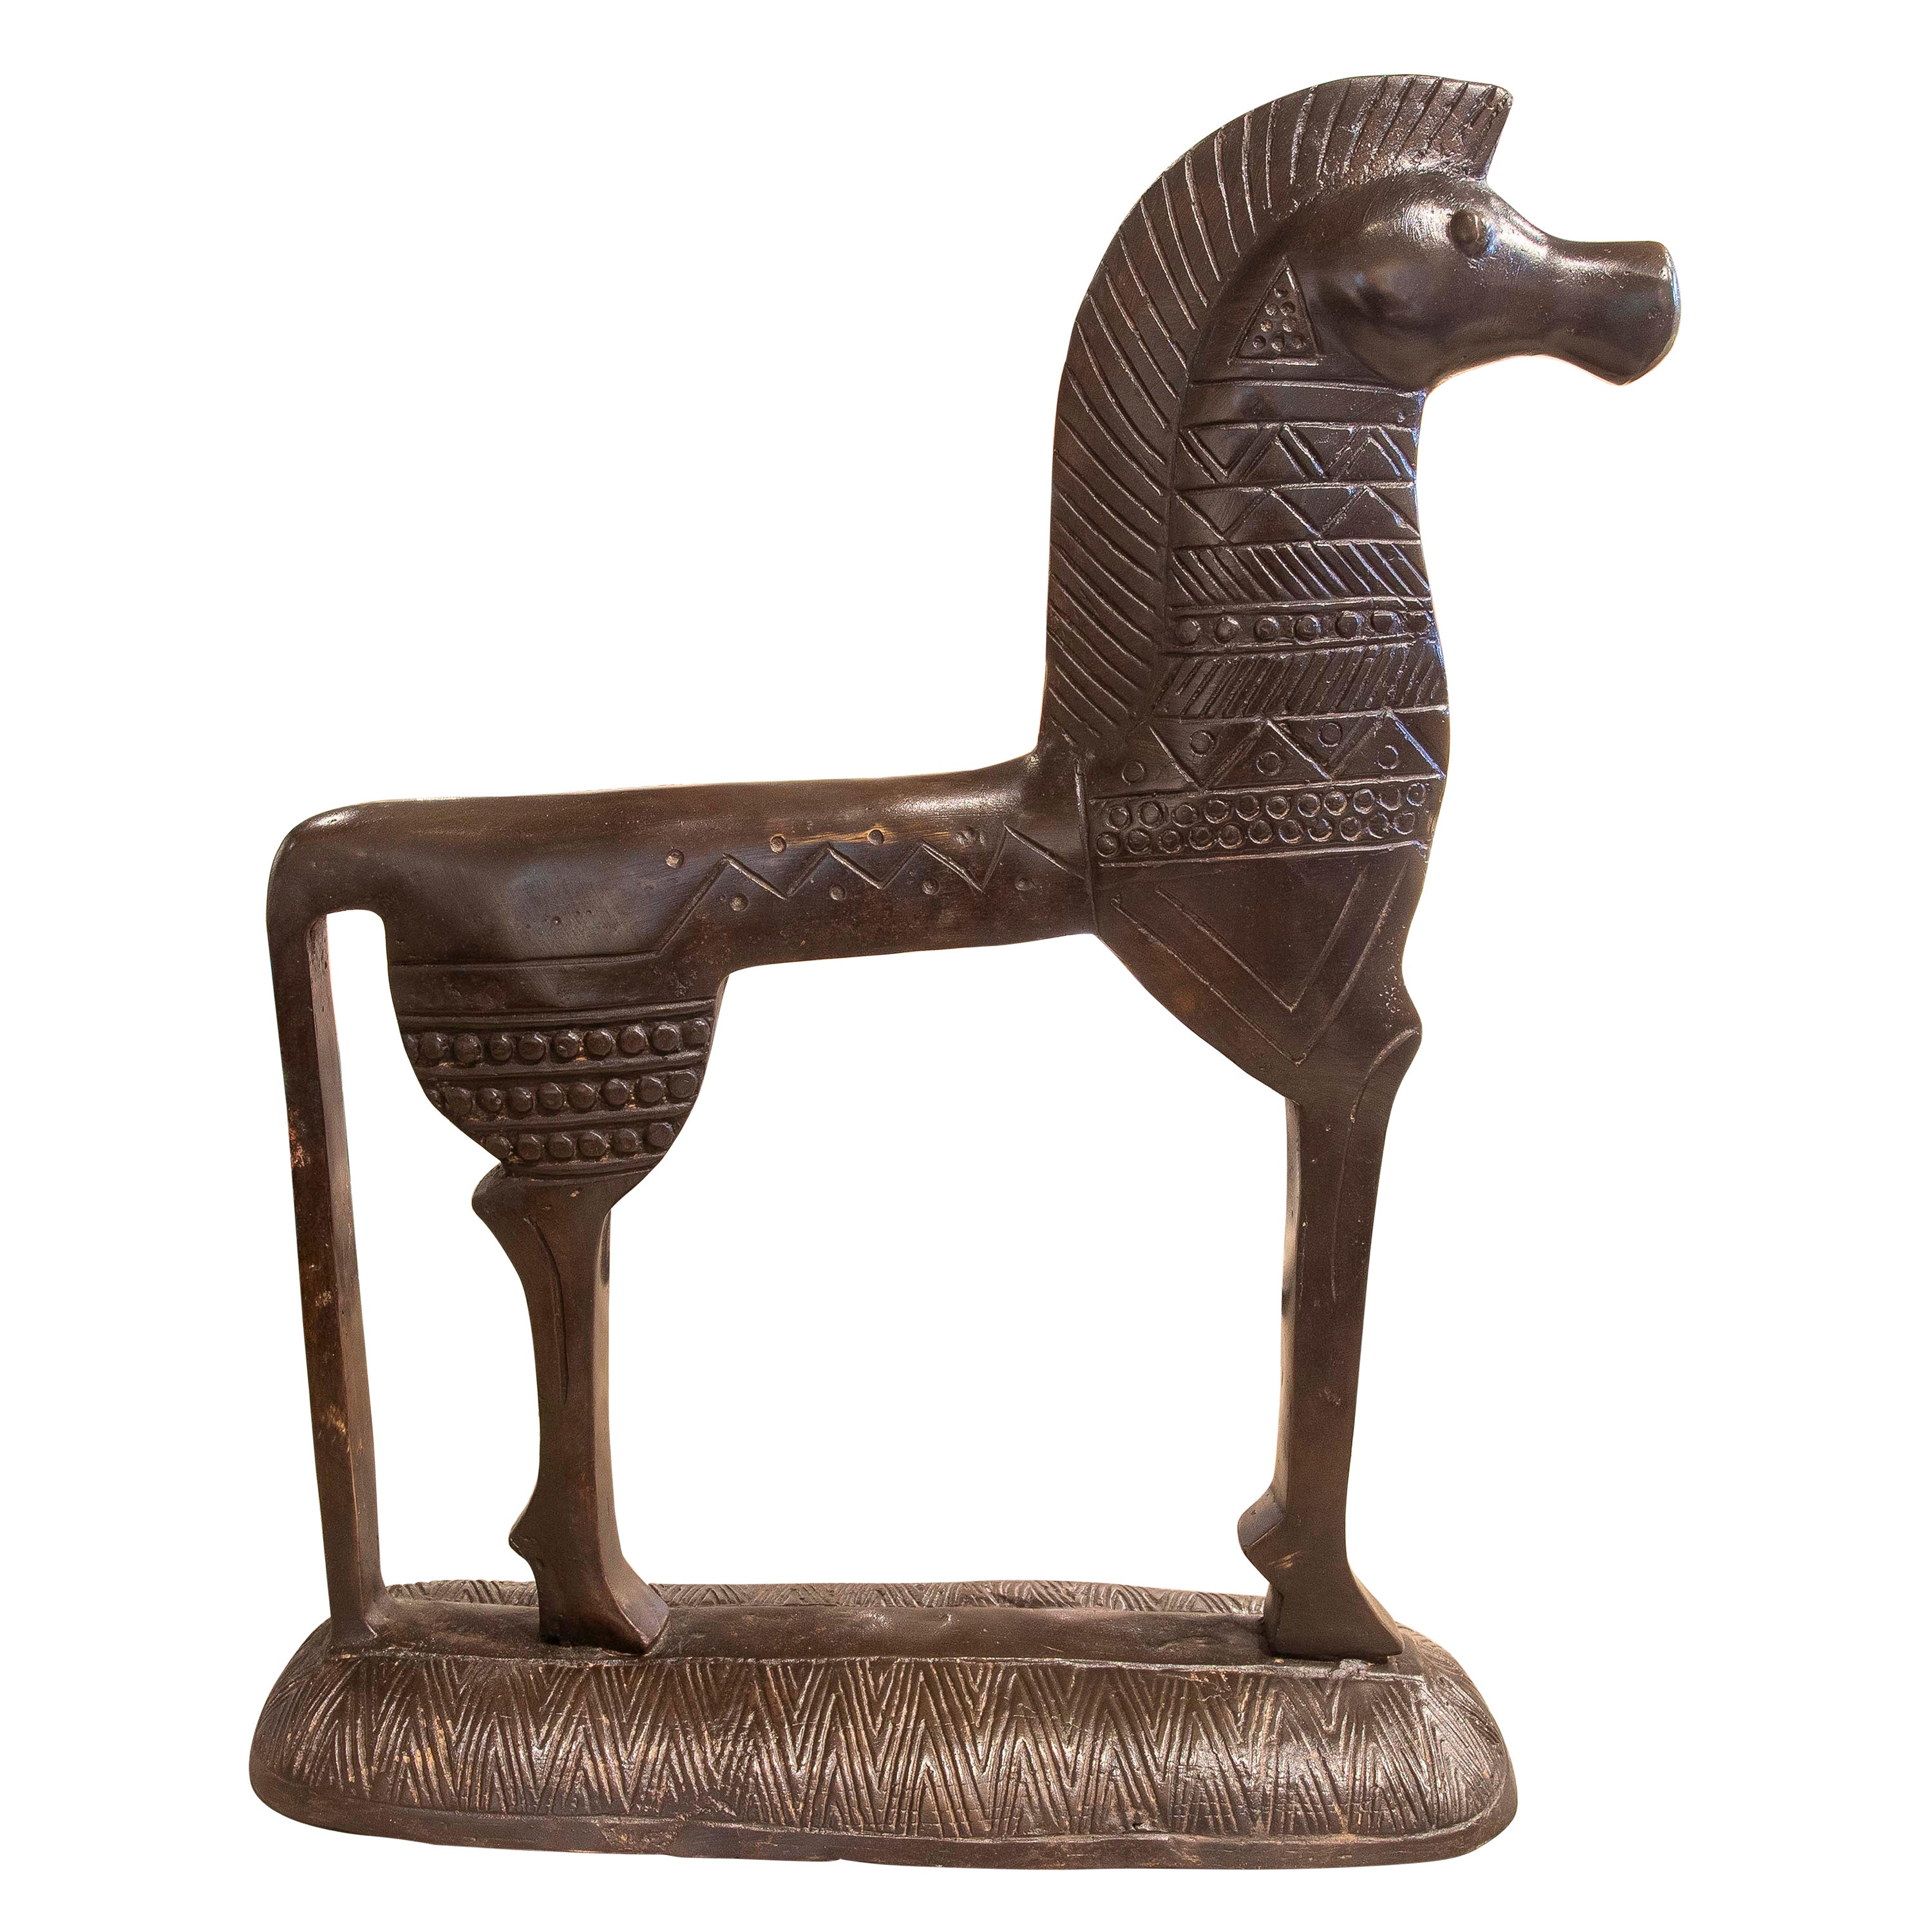 Bronze Horse Sculpture in the Style of the Trojan period